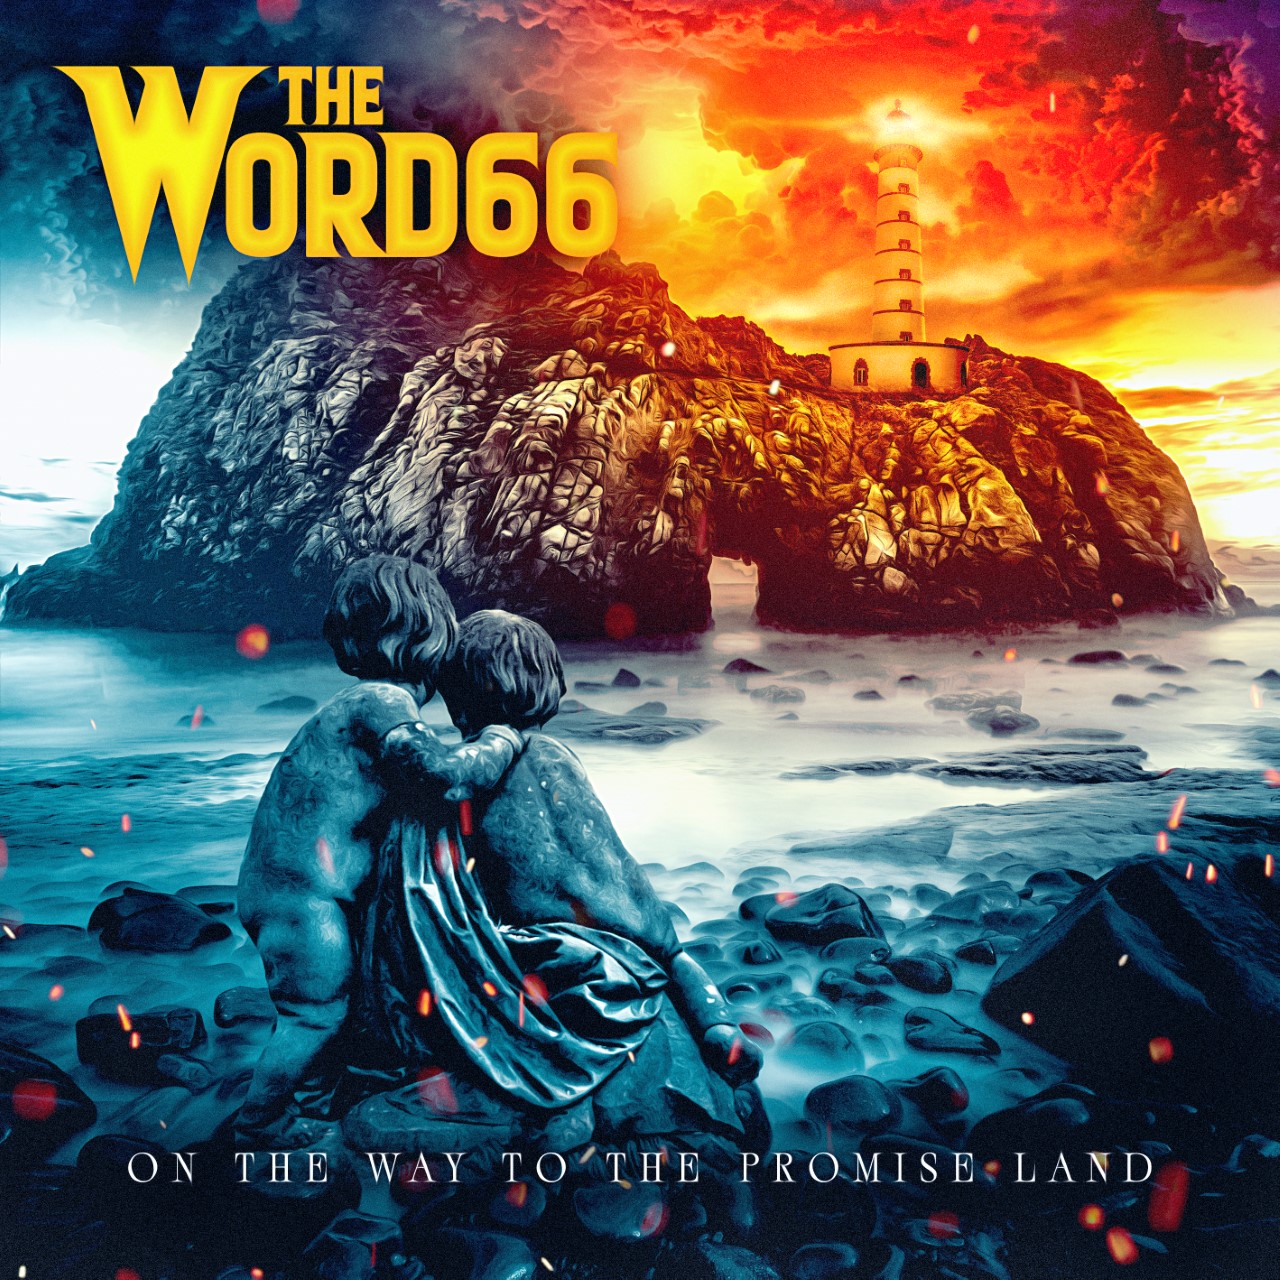 The Word66 - On The Way To The Promise Land